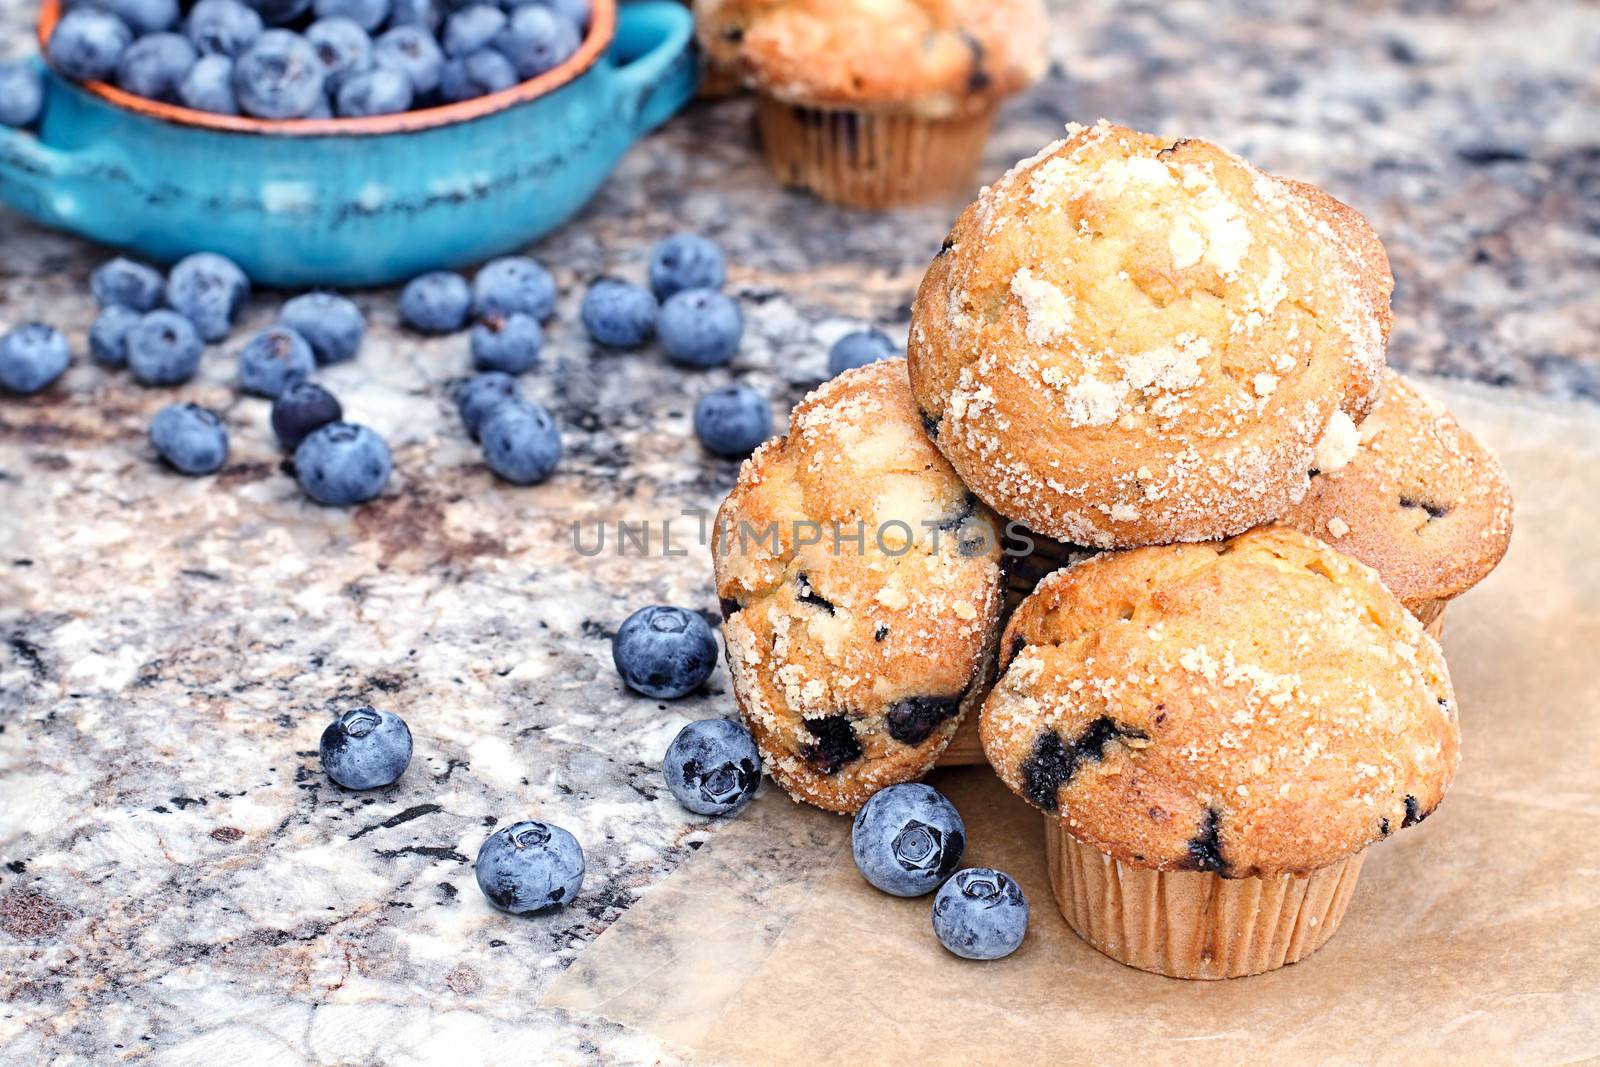 Blueberry Muffins and Berries by StephanieFrey